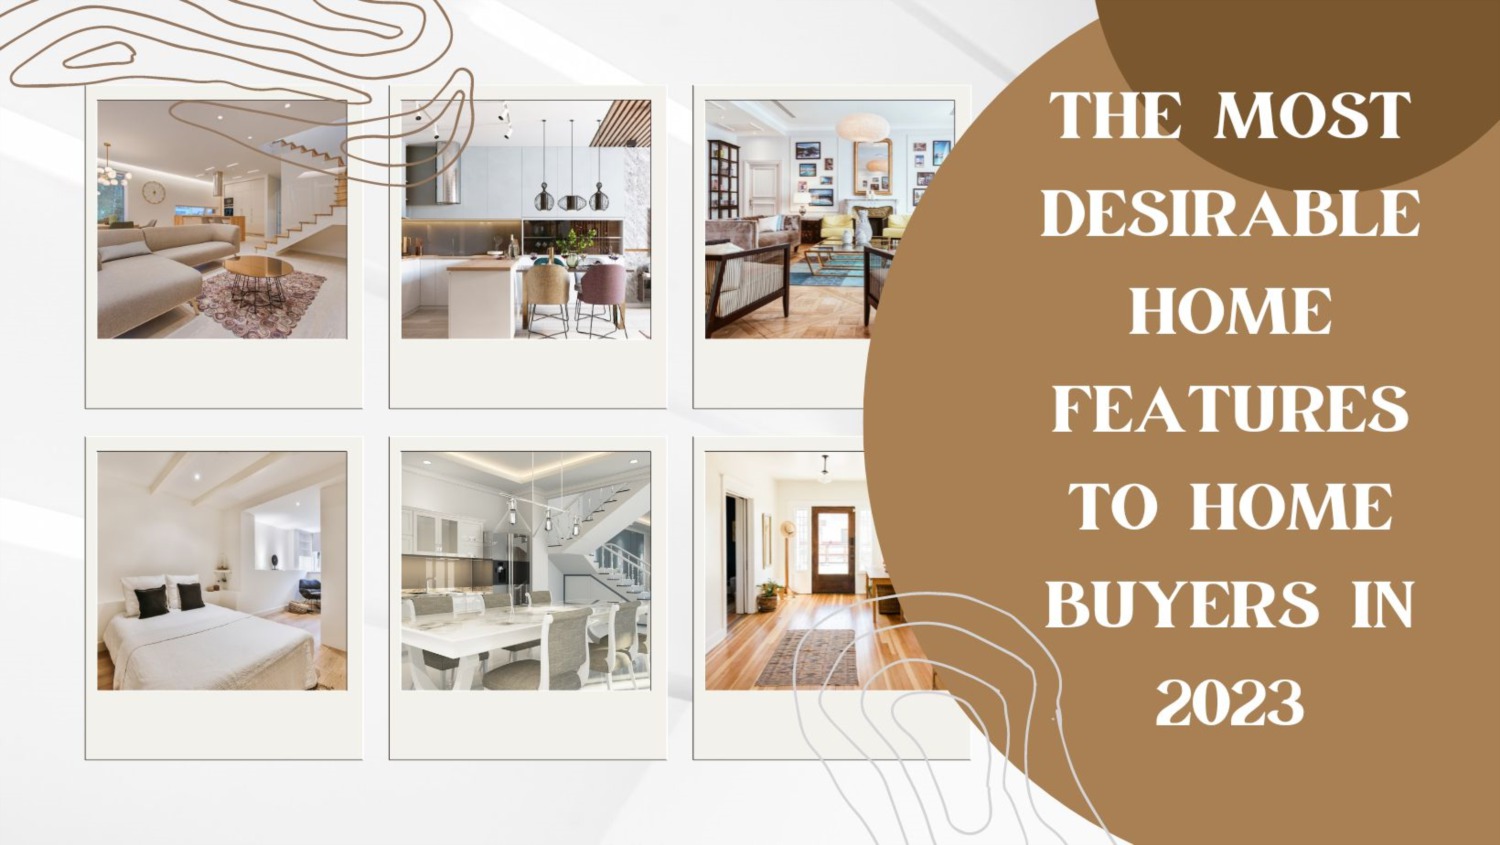 17909 The Most Desirable Home Features To Home Buyers In 2023 